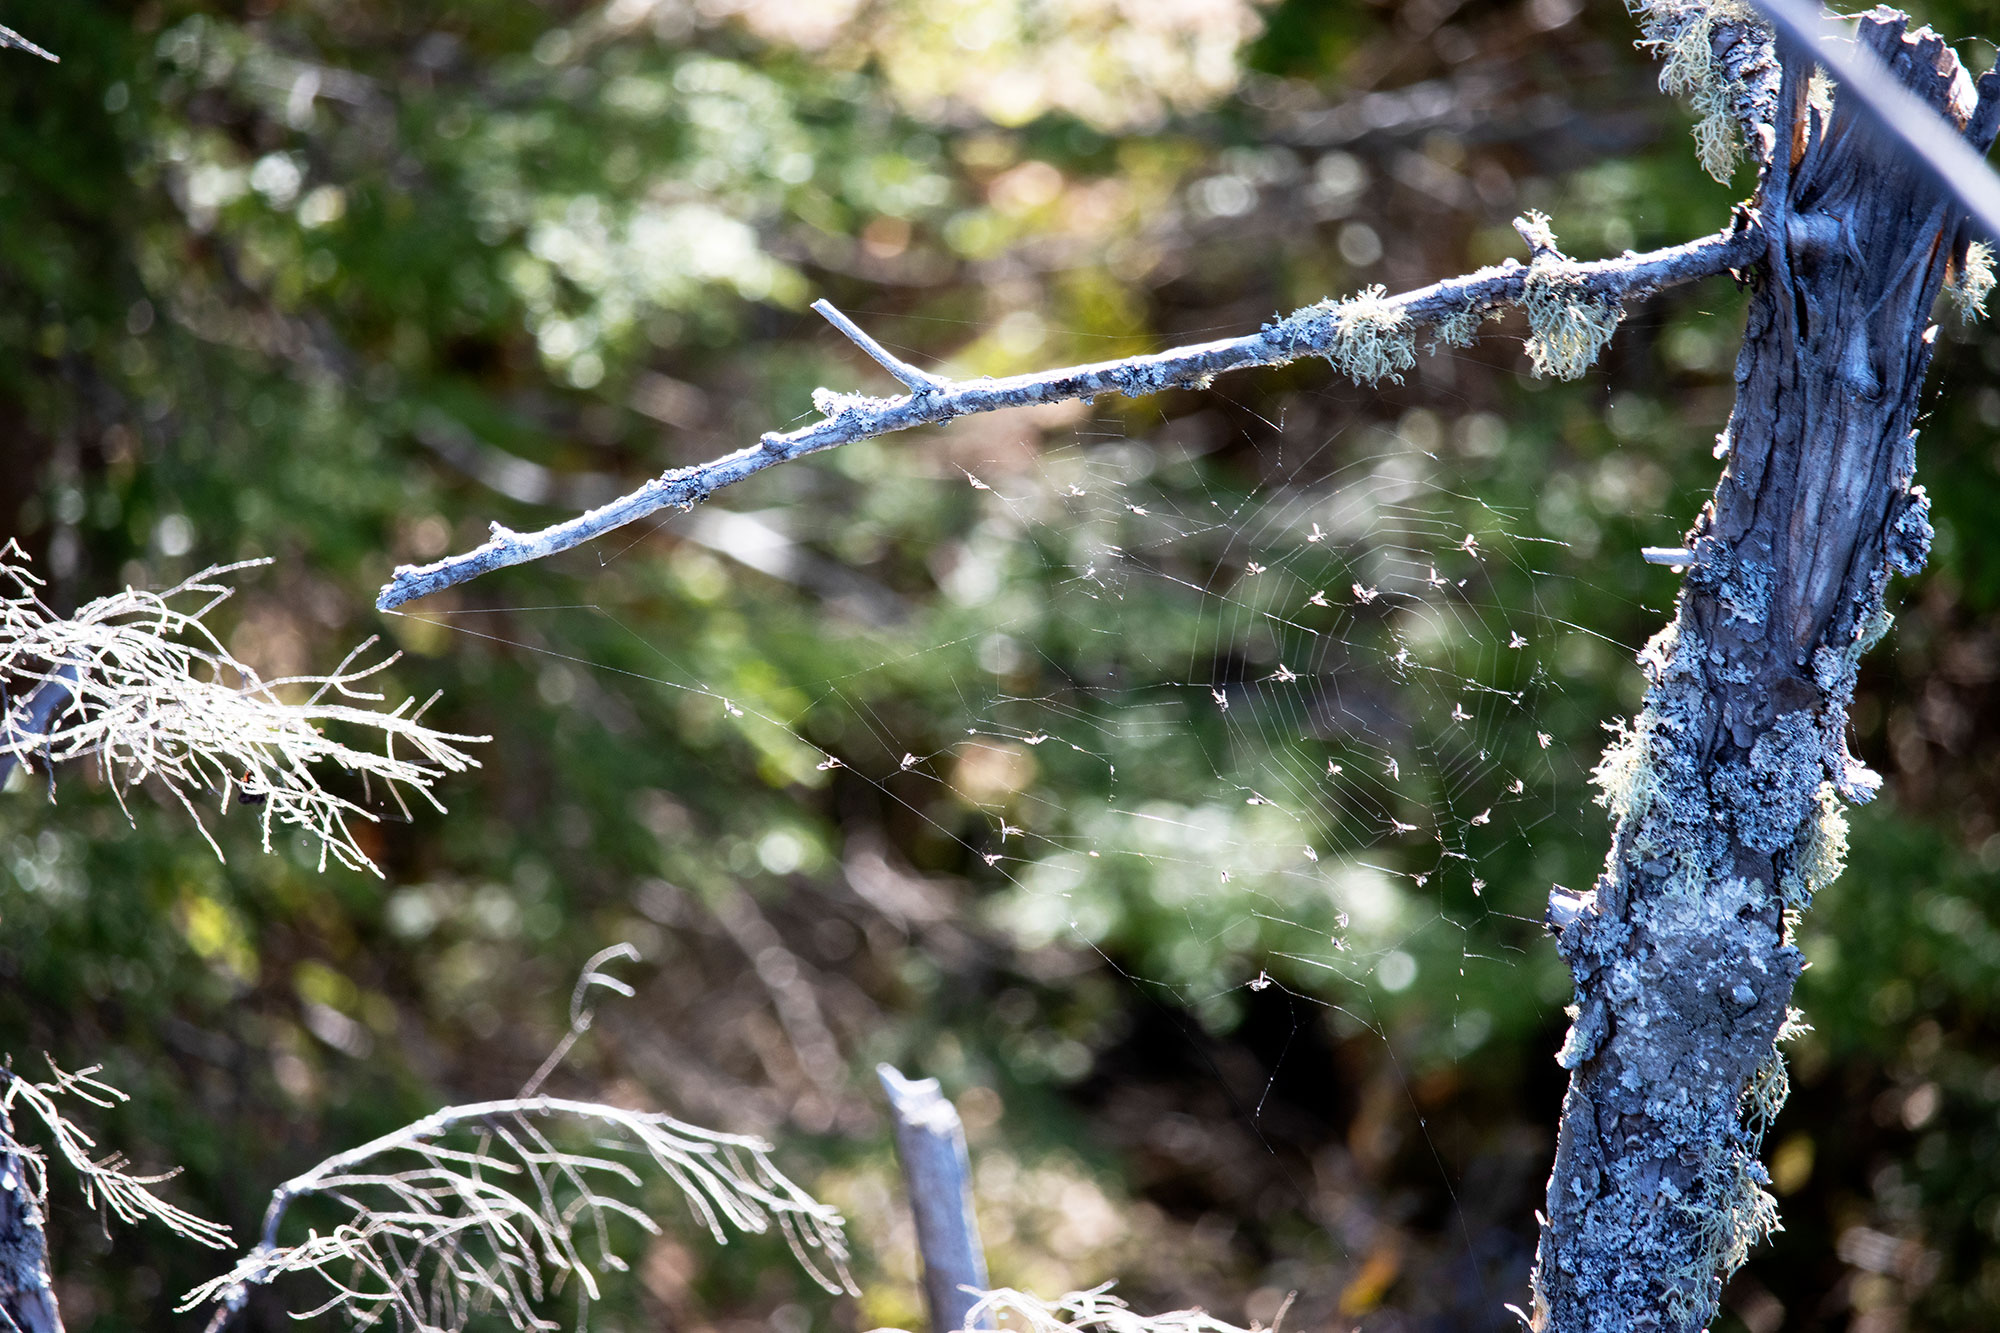 Spider web with flies caught in it, Algonquin Park May 2022